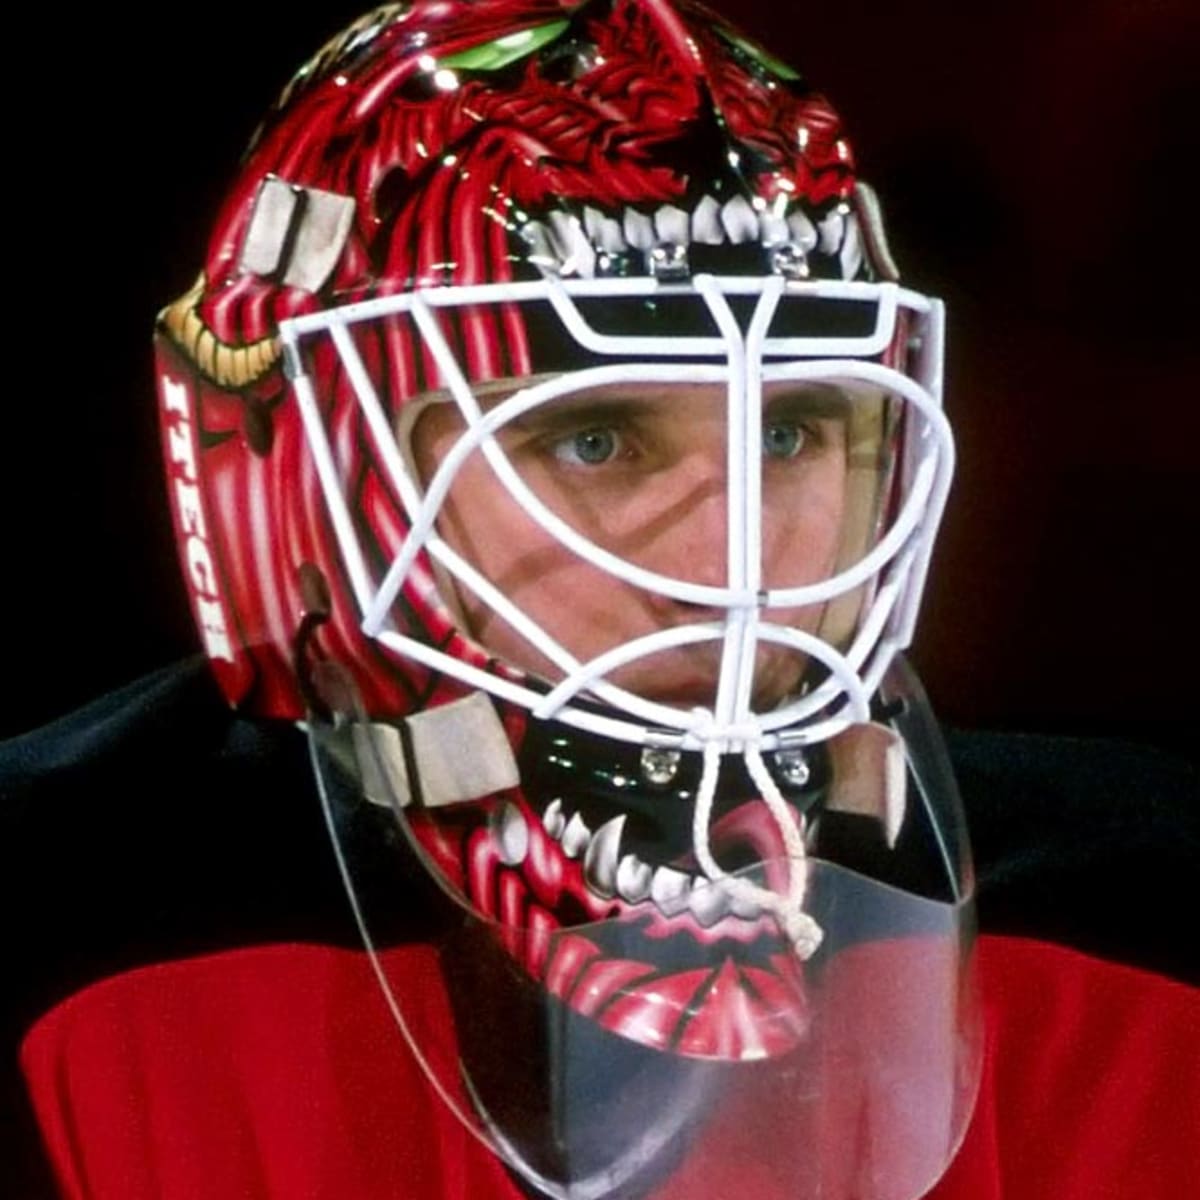 I know it's not all of his masks, but Ed Belfour's eagle mask was